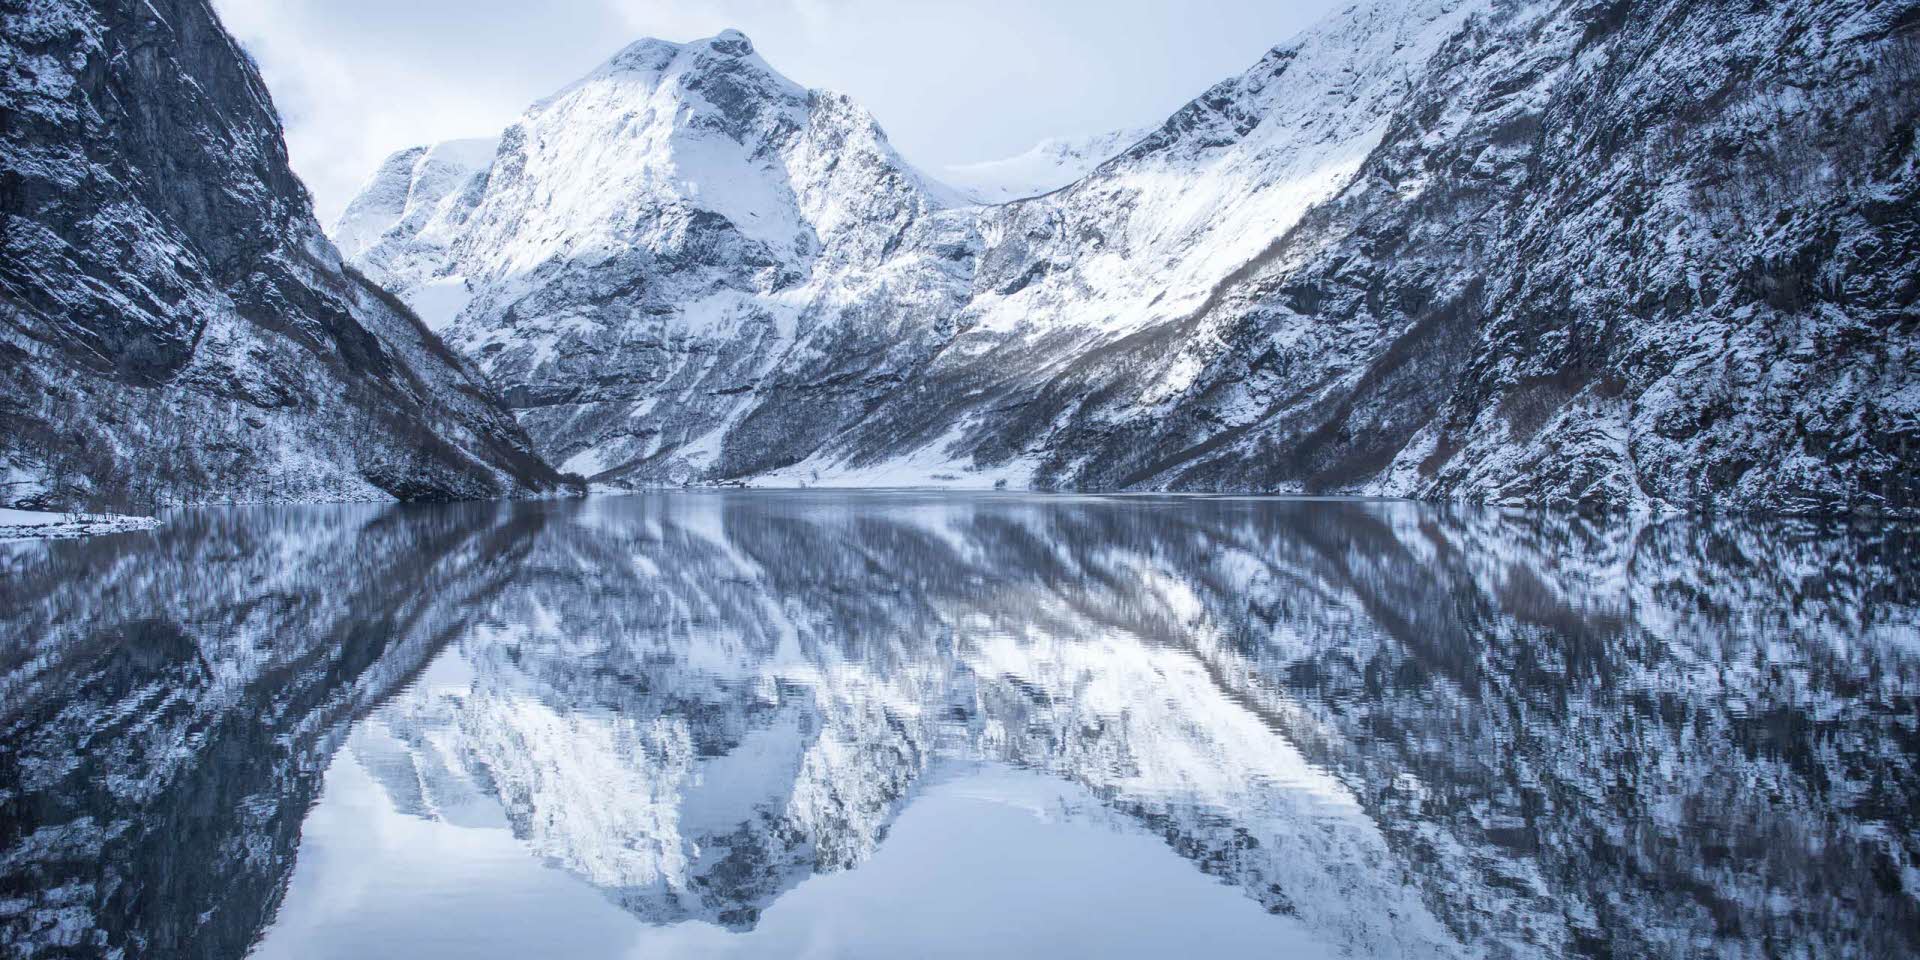 Nærøyfjord in winter with snow clad peaks and still fjord